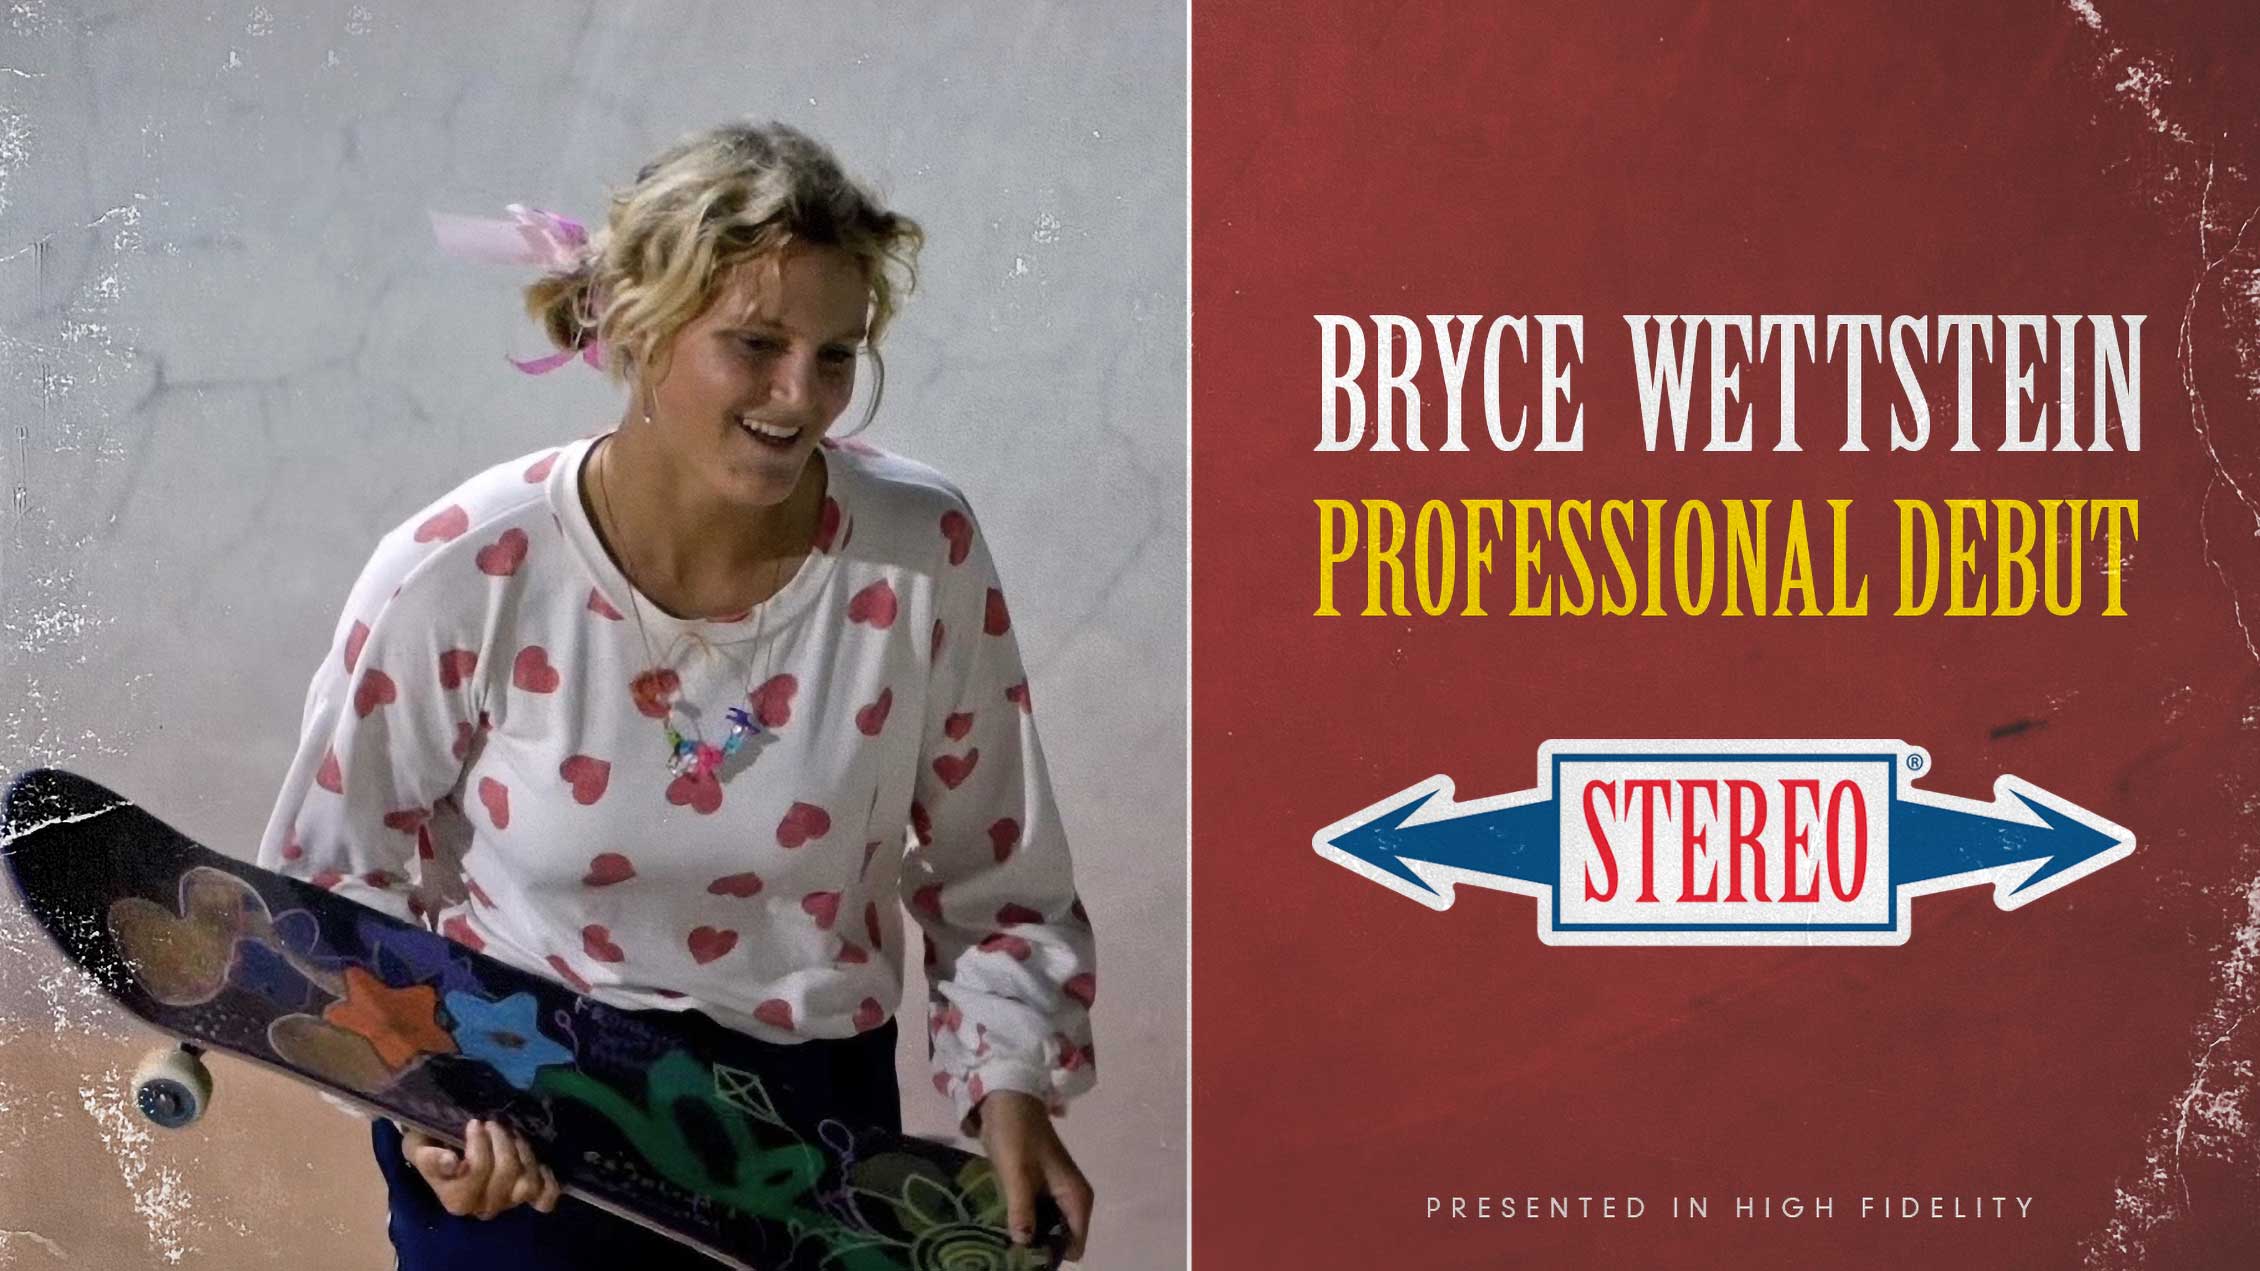 Stereo Presents - Bryce Wettstein, Professional Debut